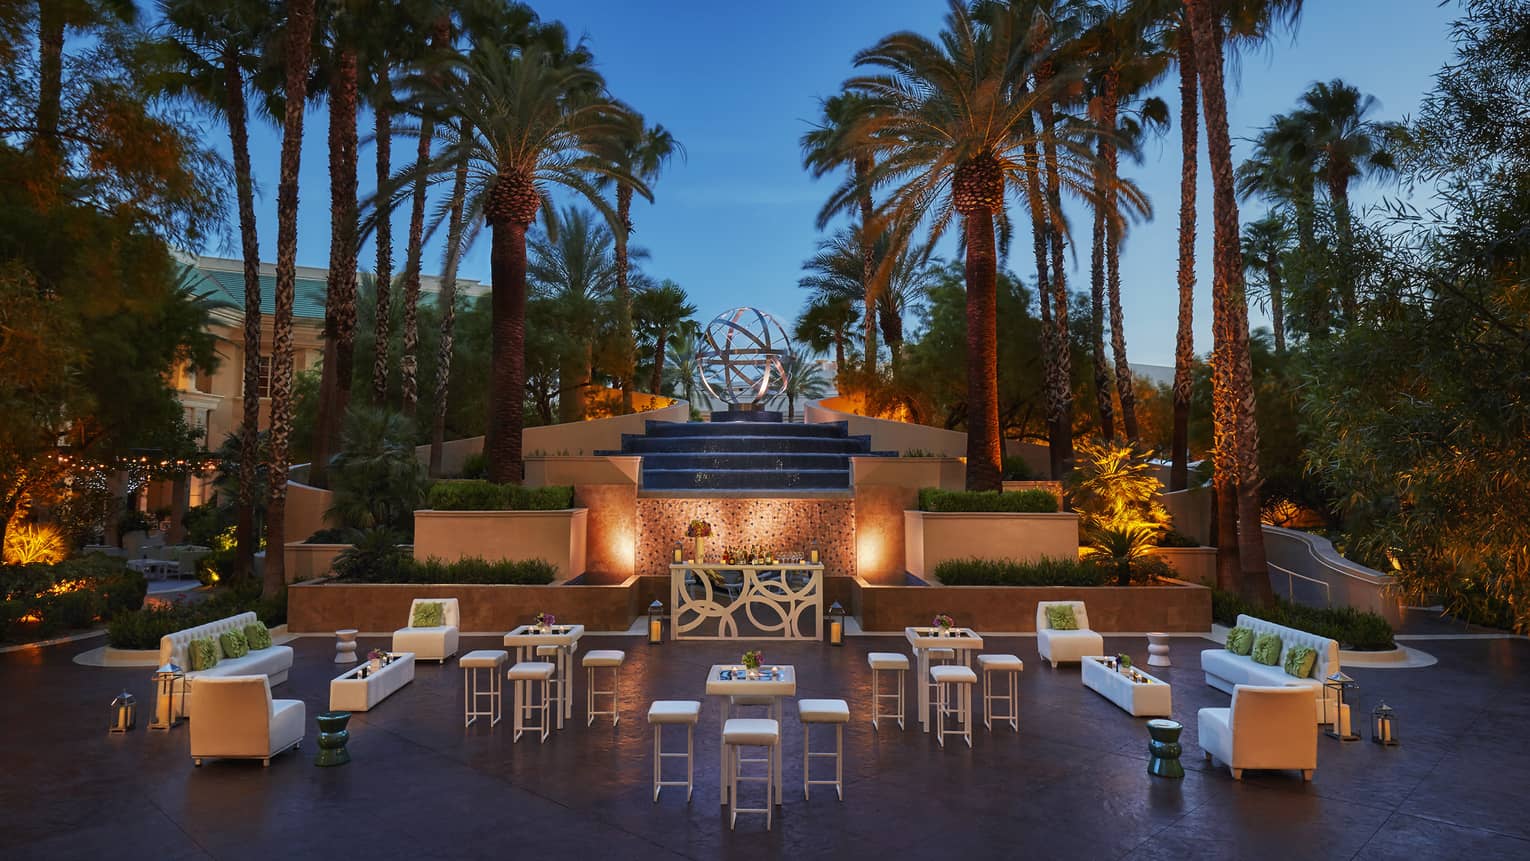 Palm trees over stone fountain, terrace seating area with lights at dusk